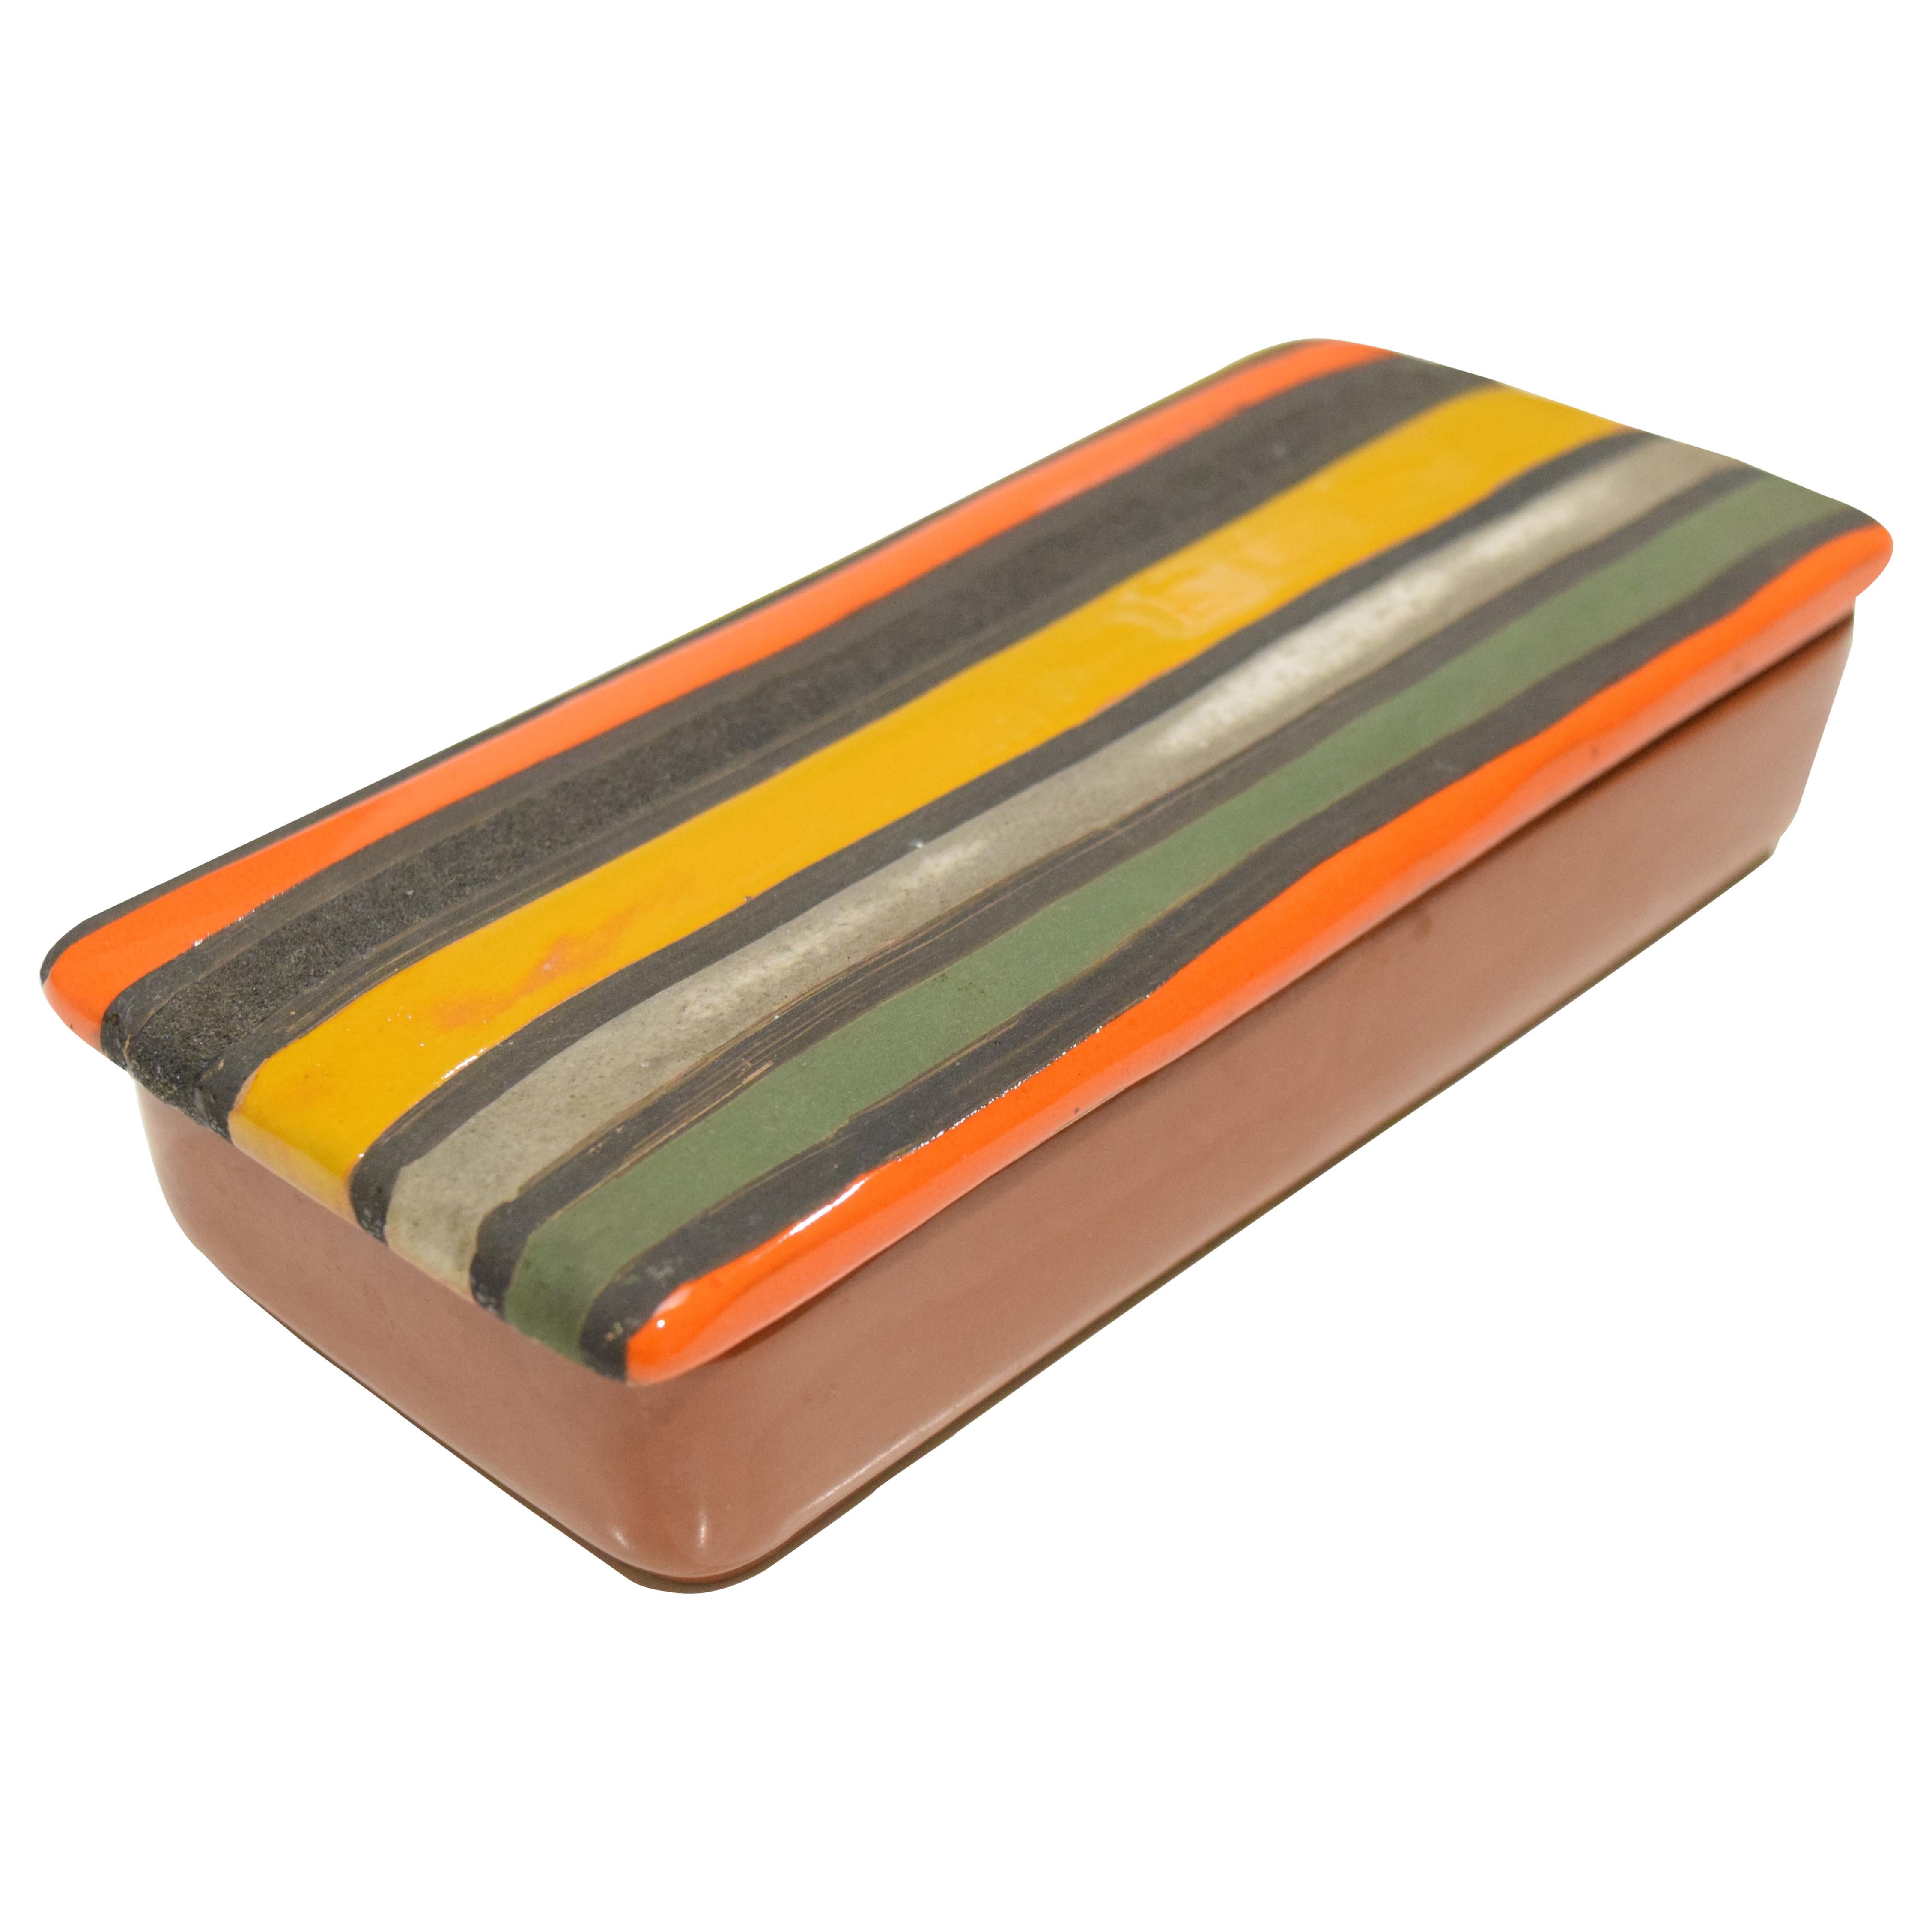 Spectacular banded ceramic box from the 